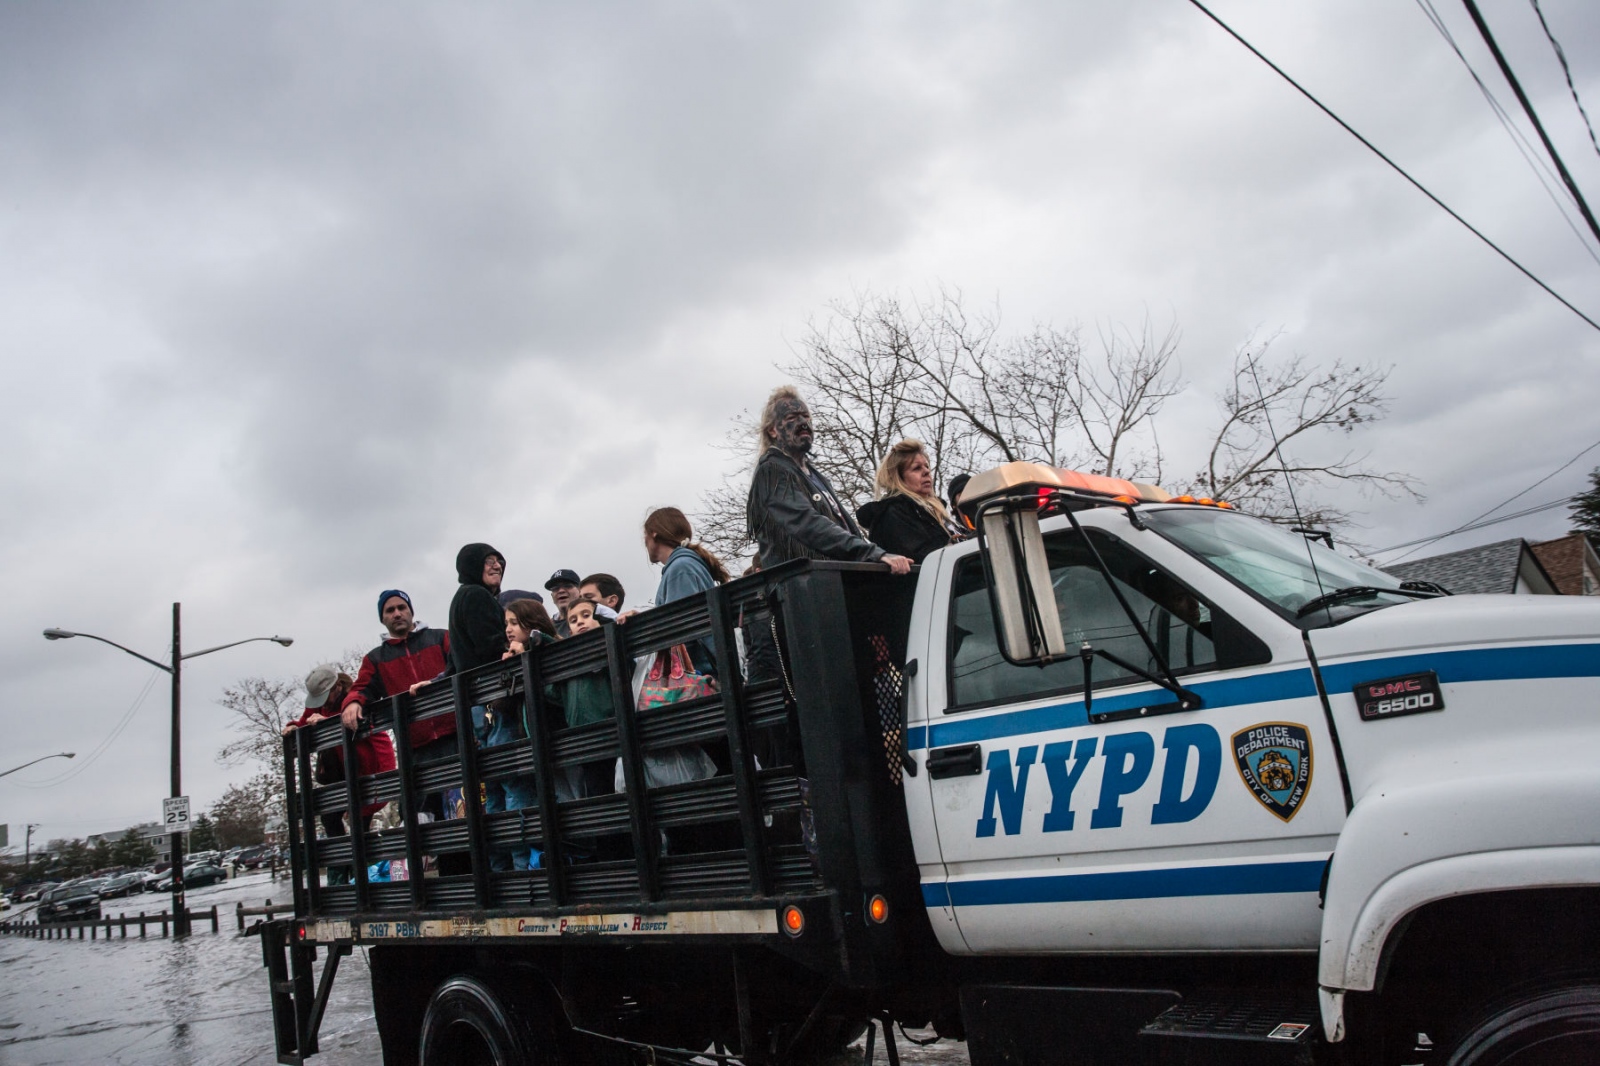 The Rockaways After Hurricane Sandy - Residents of Breezy Point are evacuated by NYPD after...